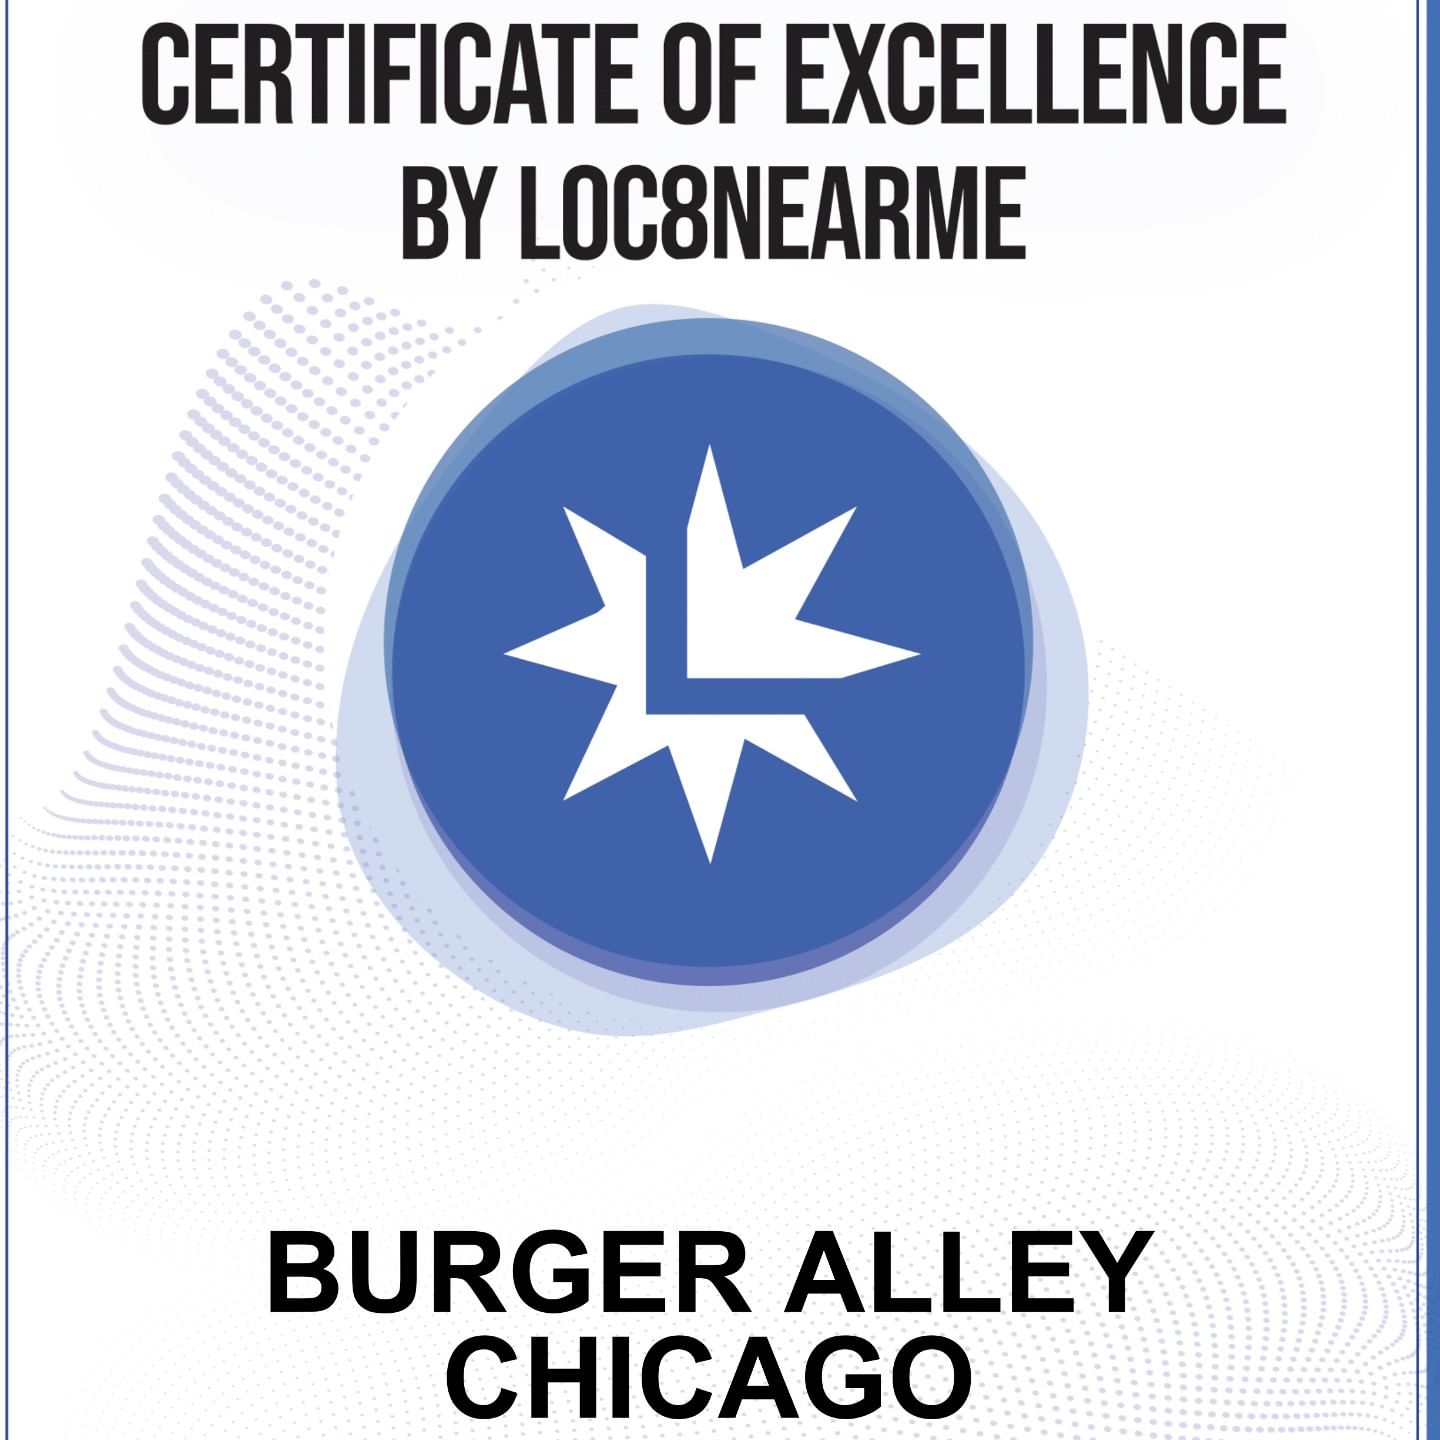 Certificate of Excellence from Loc8nearme